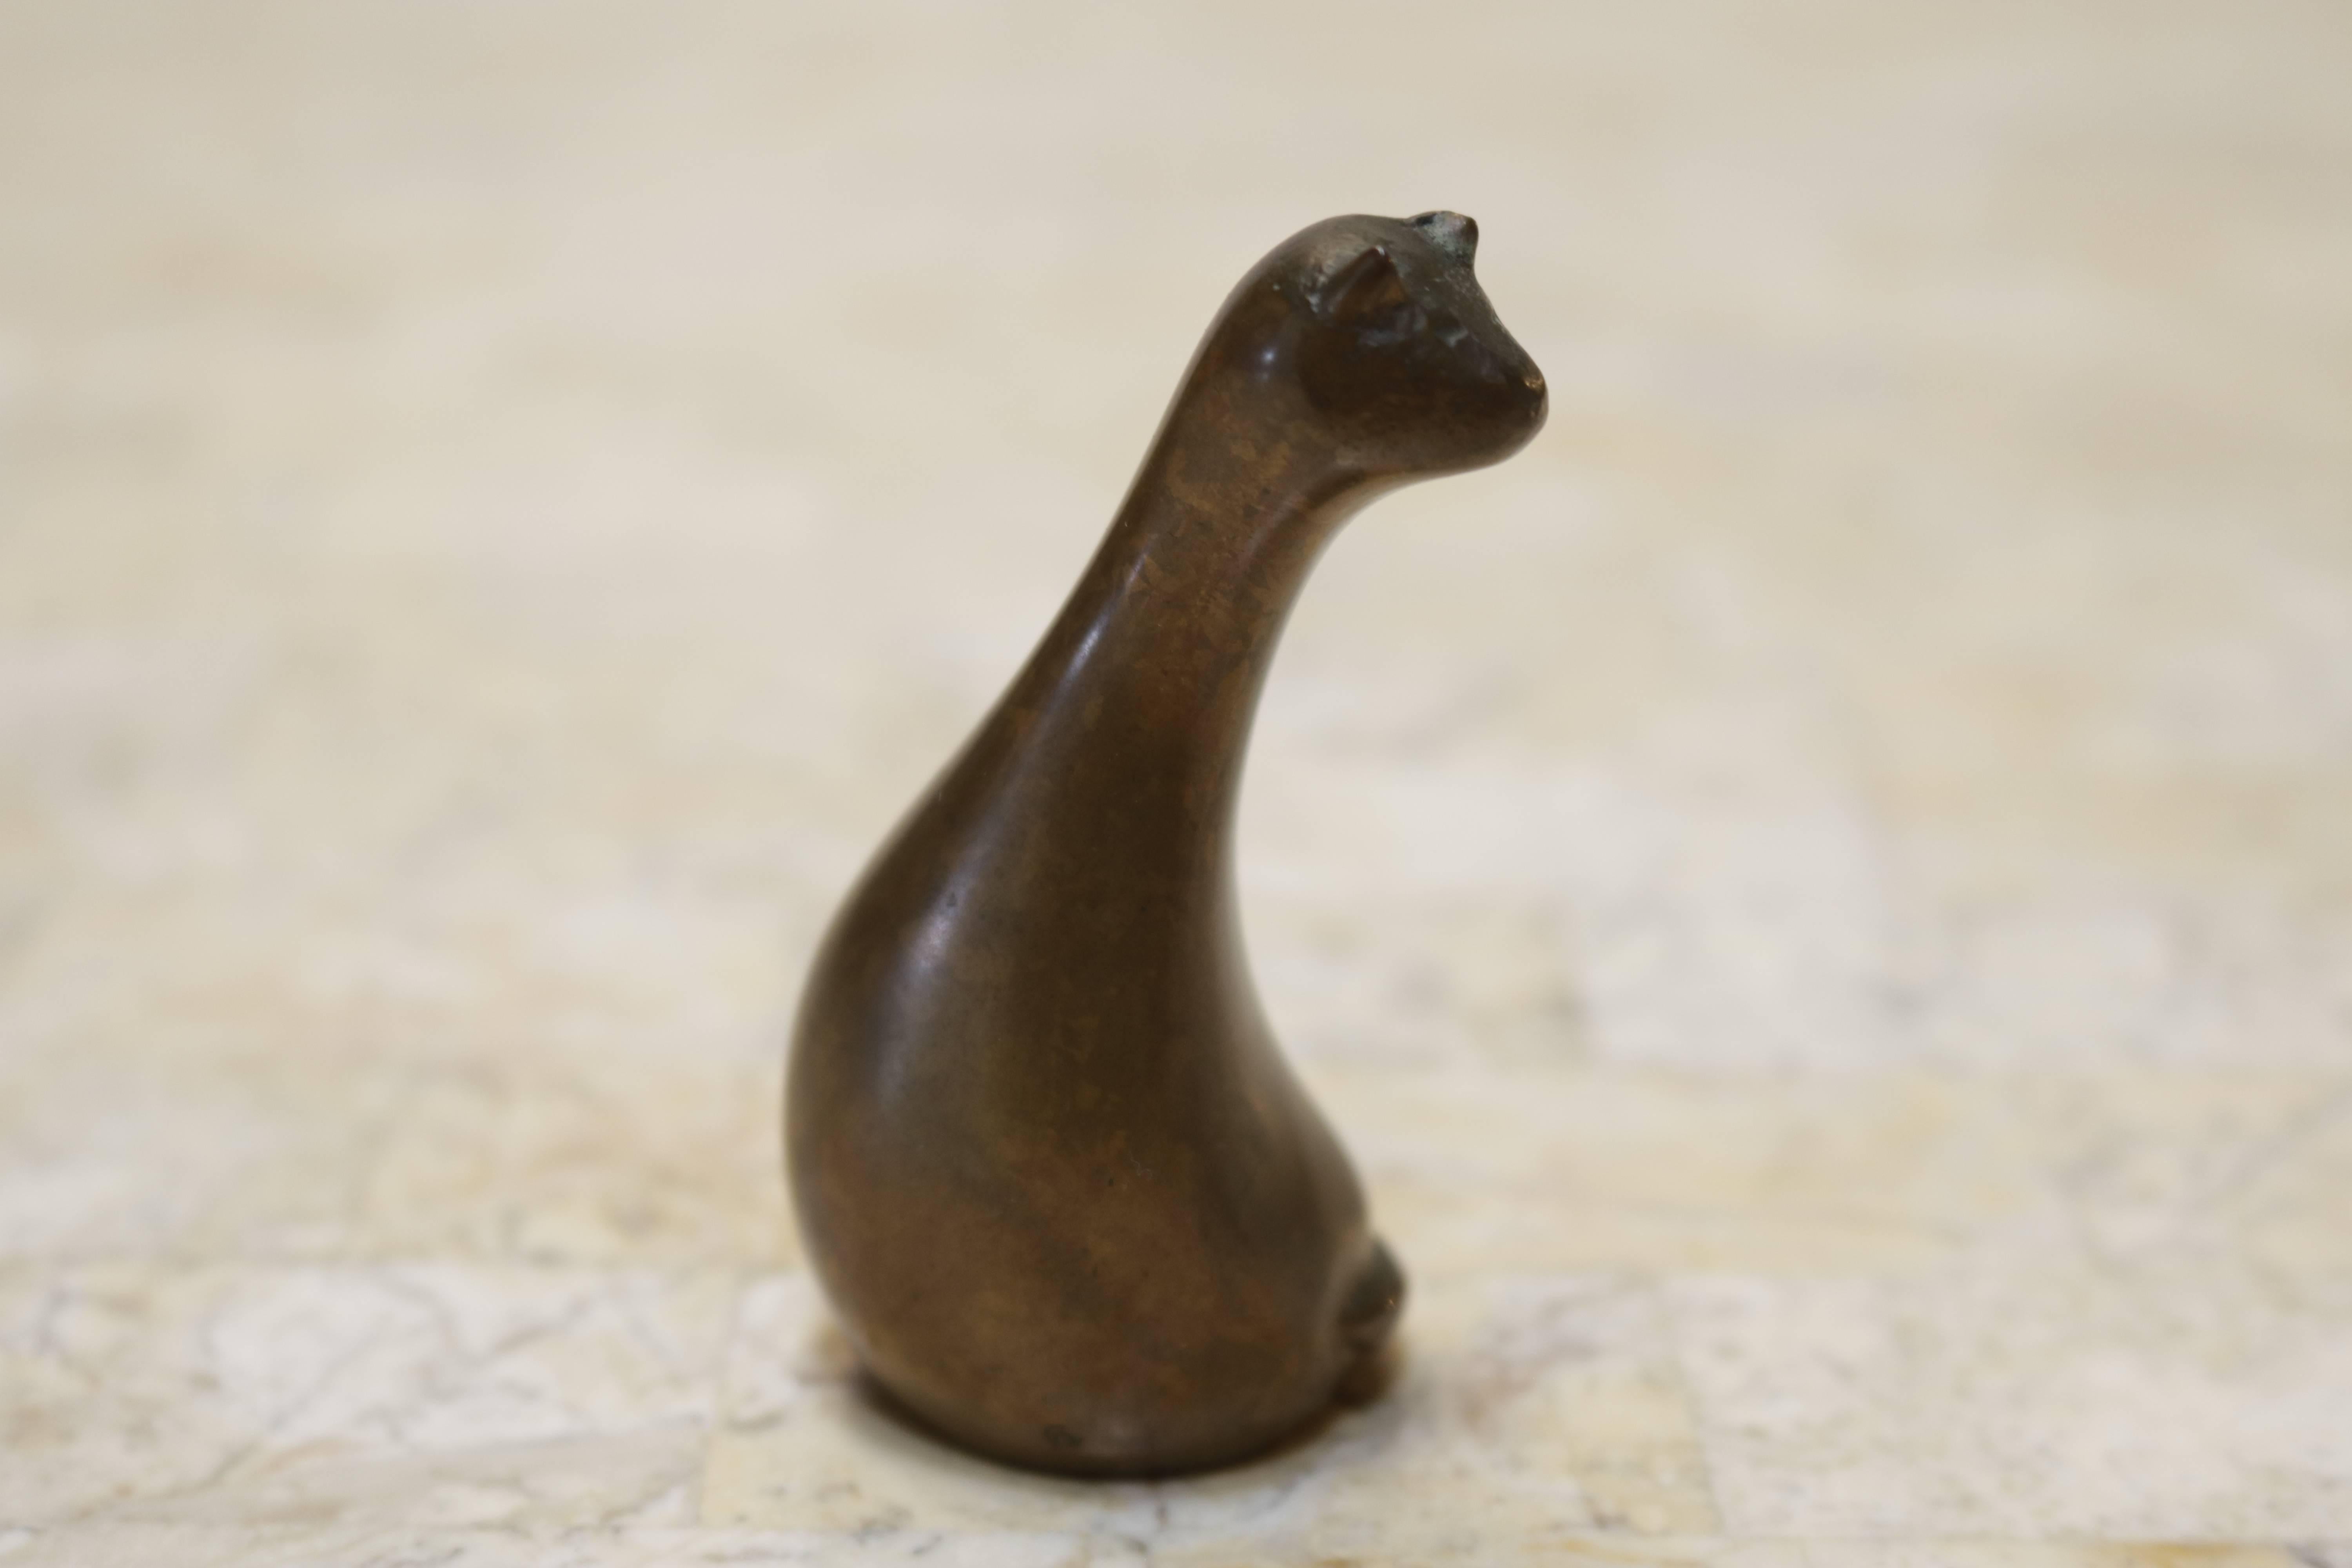 Little sculpture of a cat which could make a charming paperweight. The bronze has a beautiful patina and make you feel like holding it in your hands. 
It is signed with two letters on the bottom.